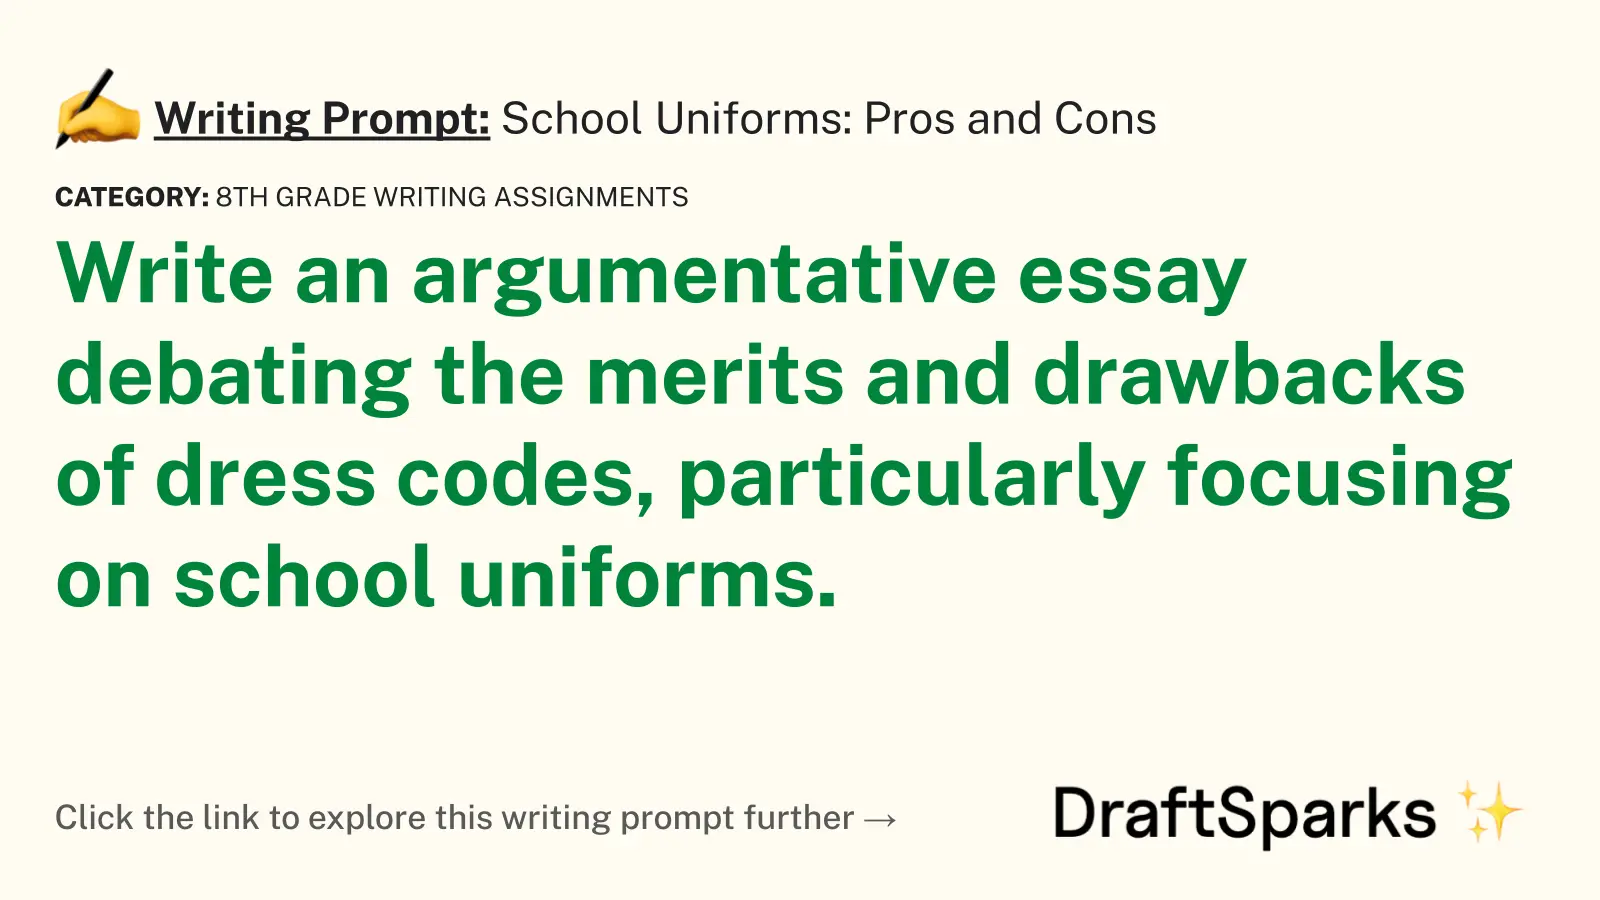 School Uniforms: Pros and Cons